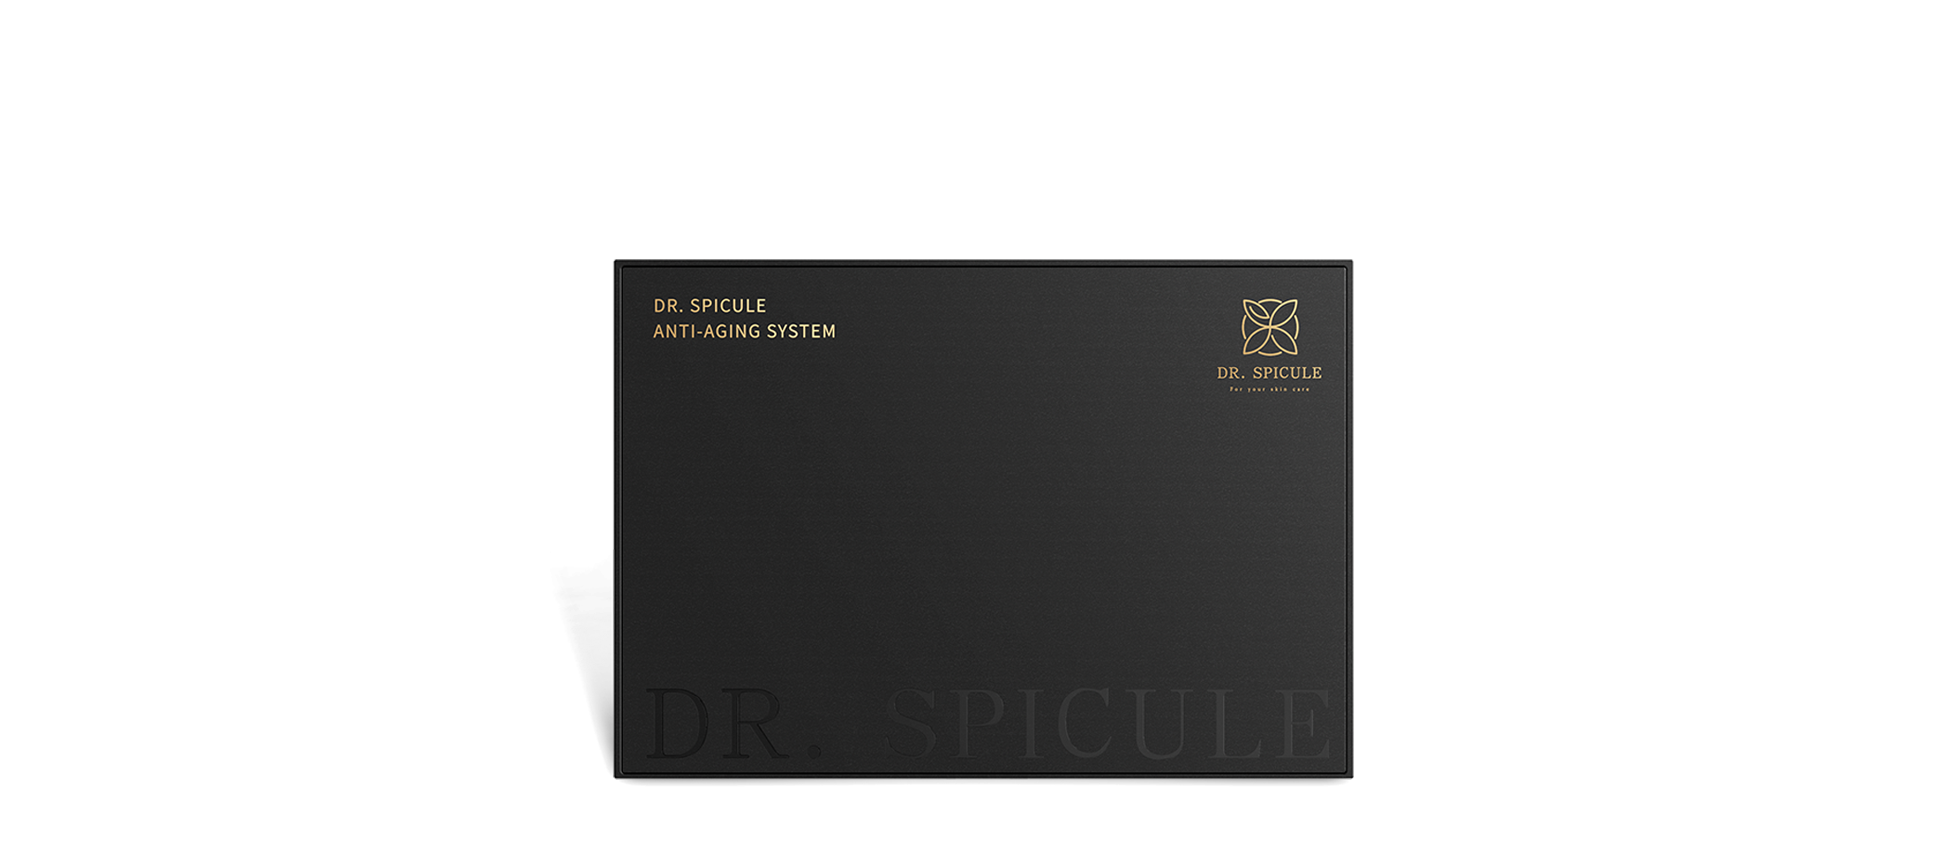 DR. SPICULE Anti-Aging System